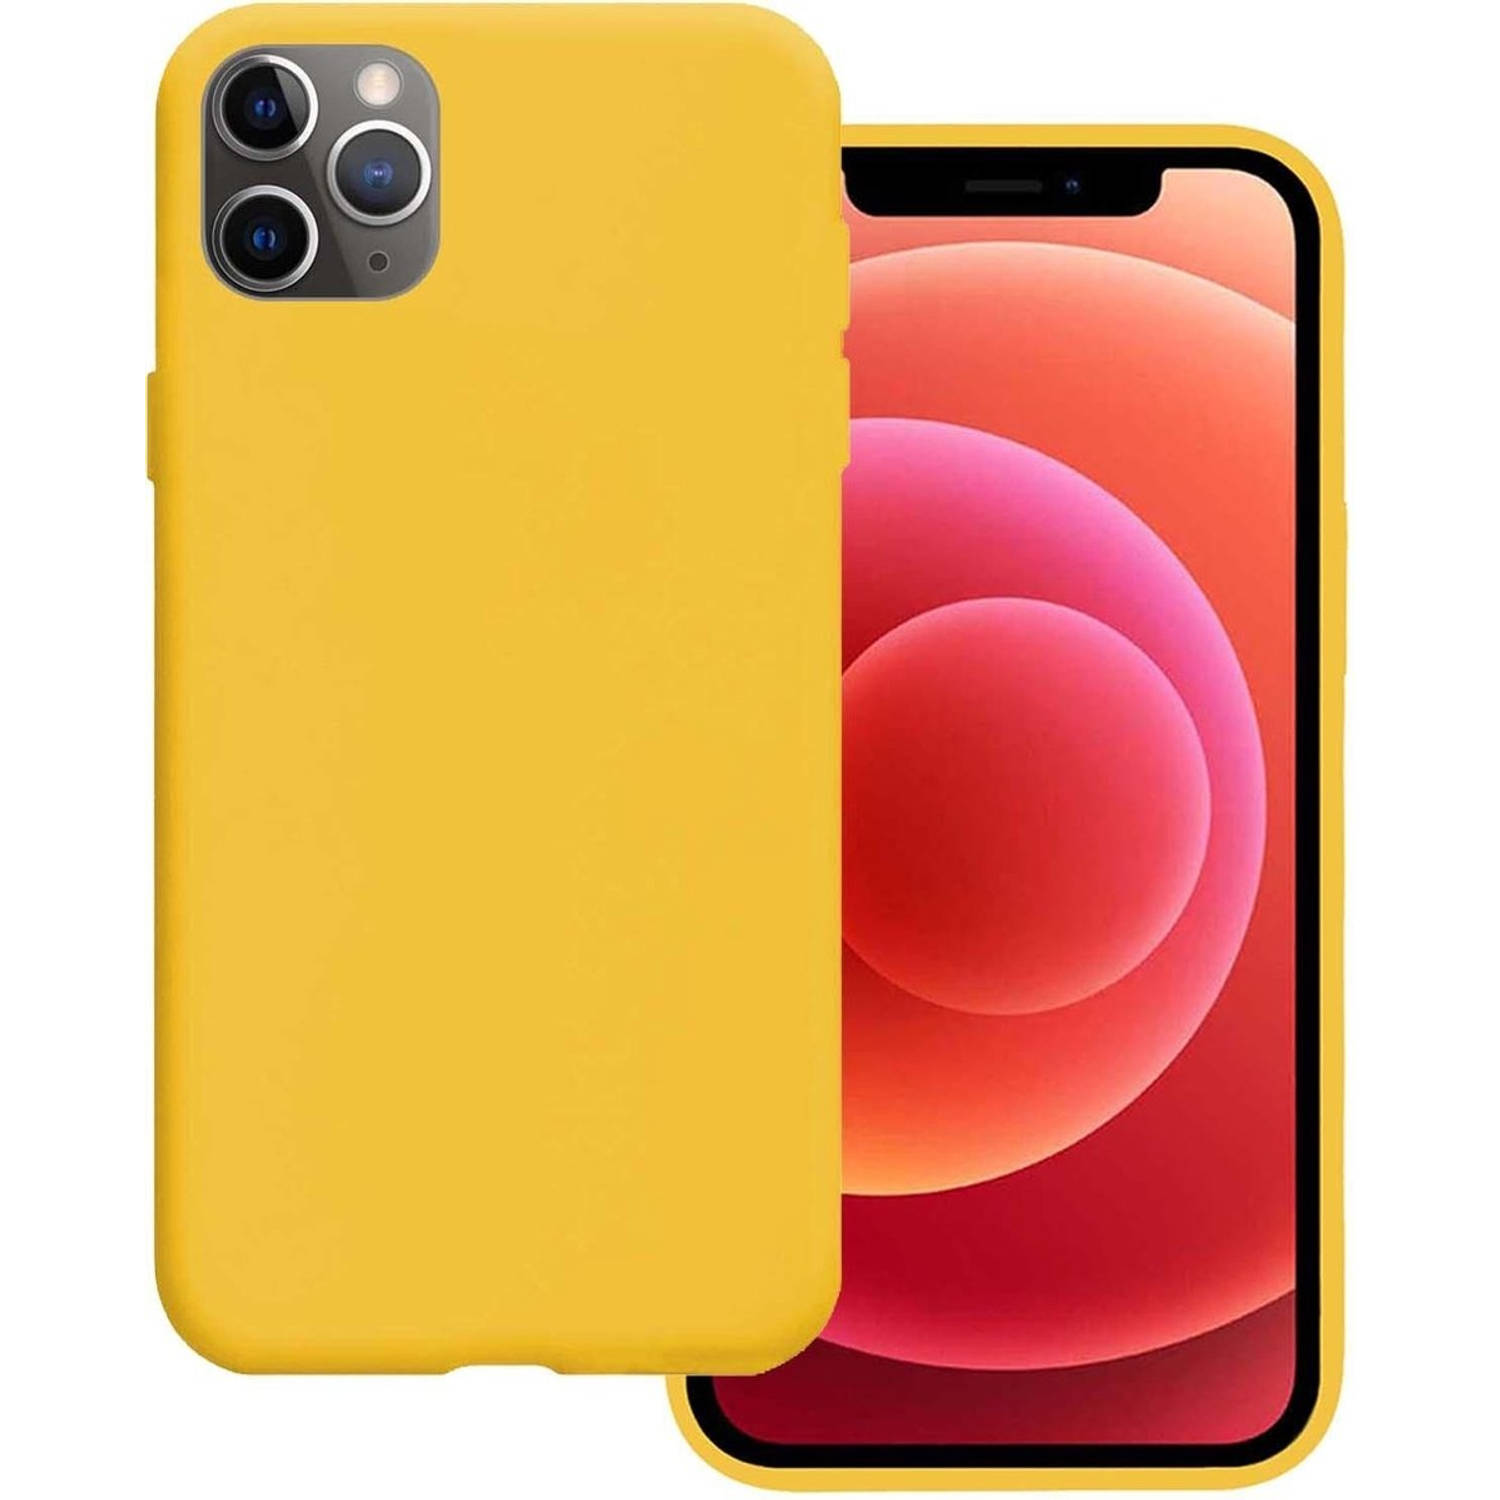 Basey Iphone 11 Pro Hoesje Siliconen Hoes Case Cover Iphone 11 Pro-geel